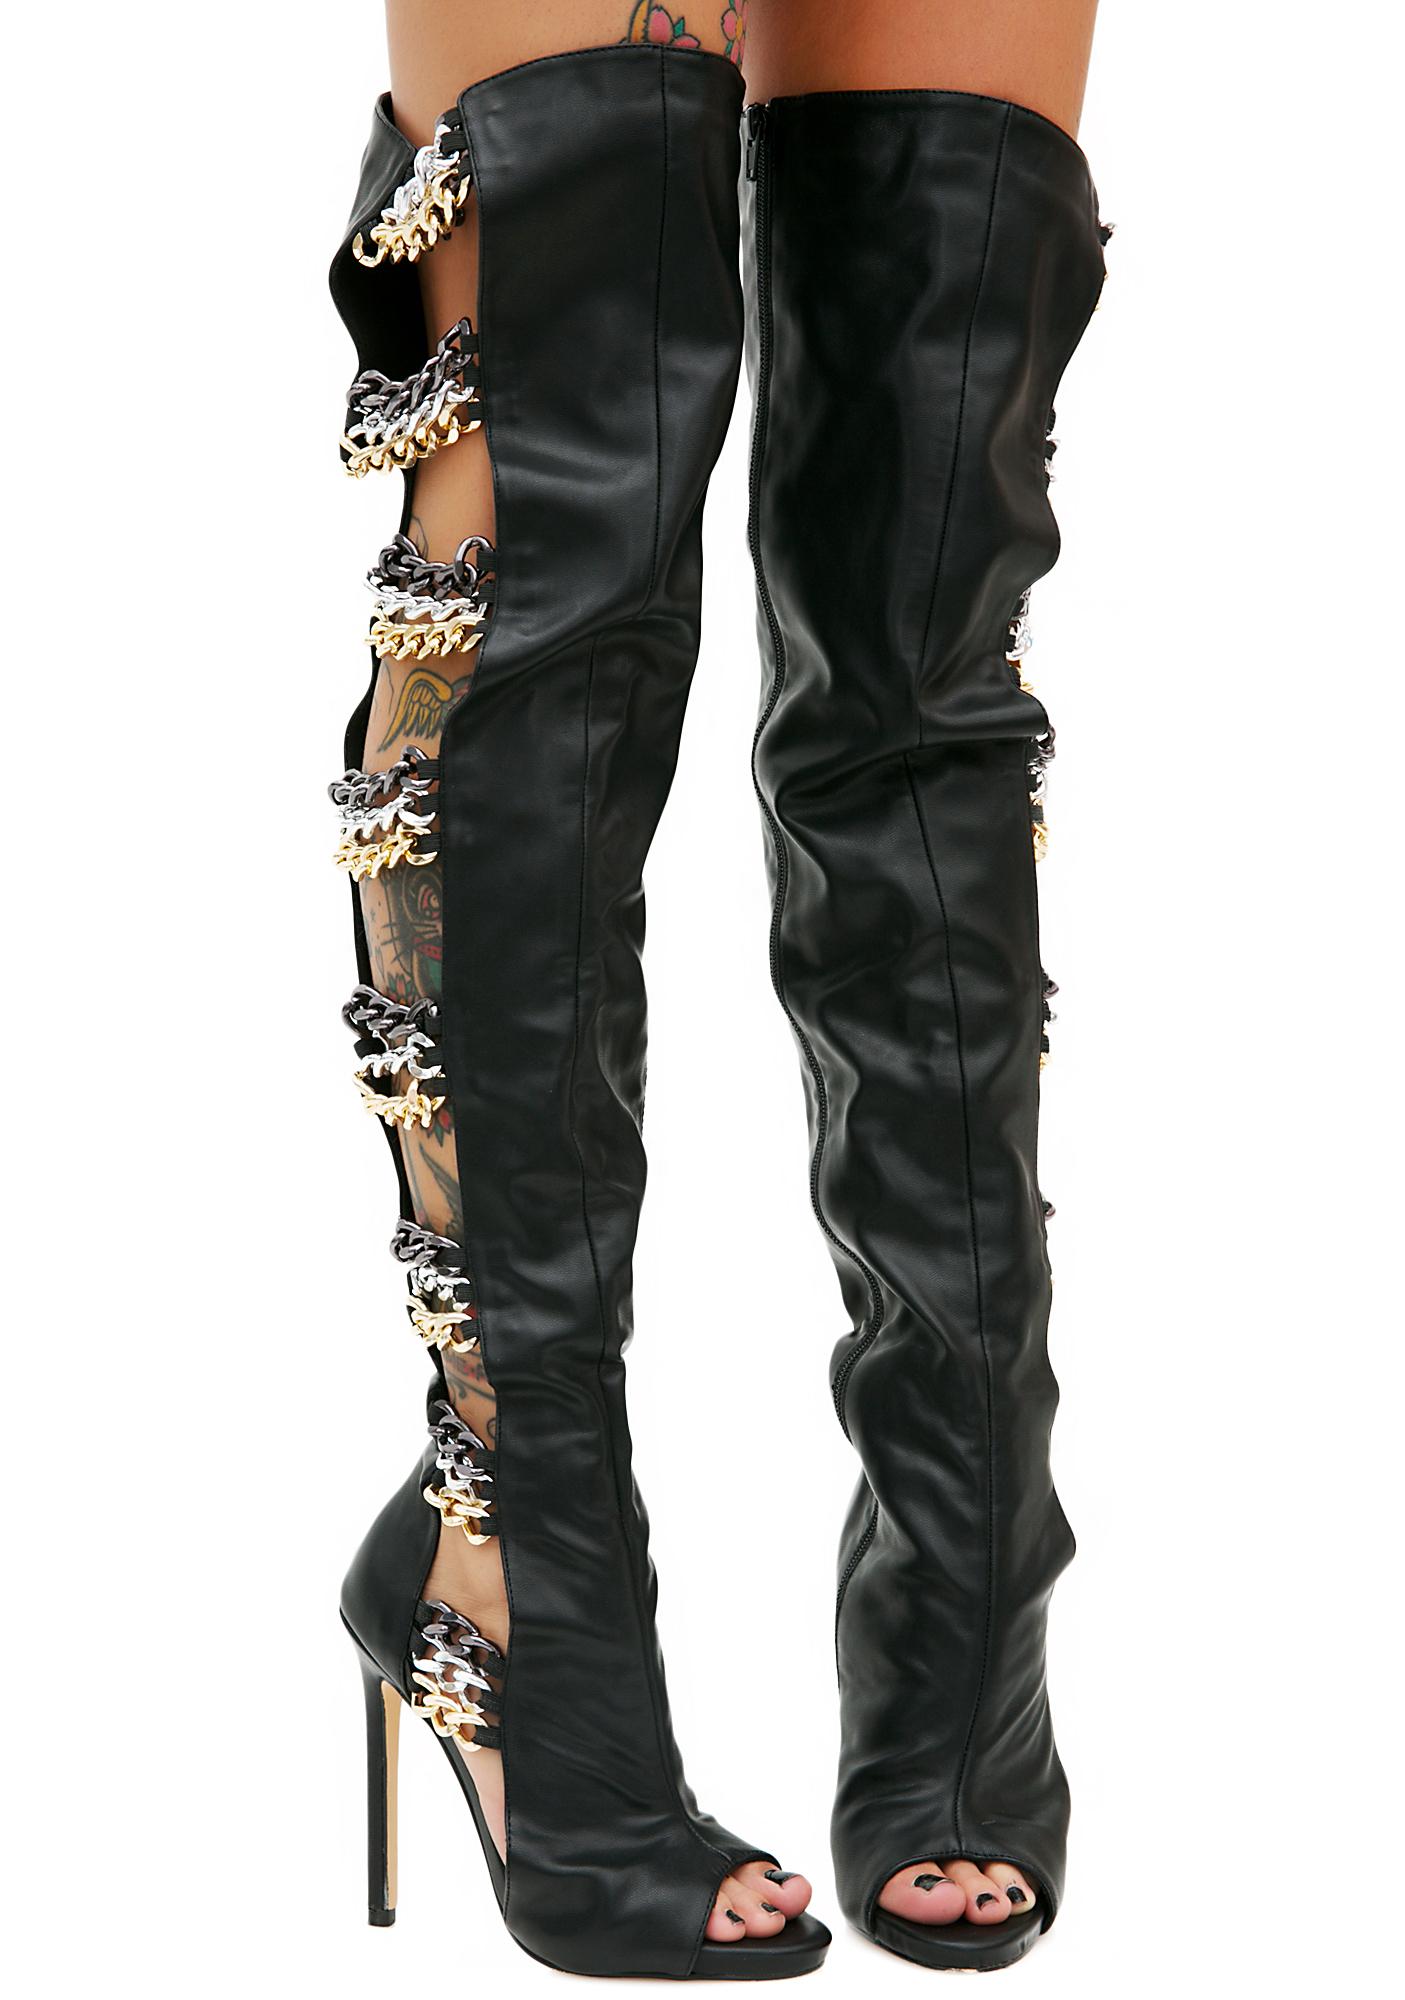 thigh high boots with chains